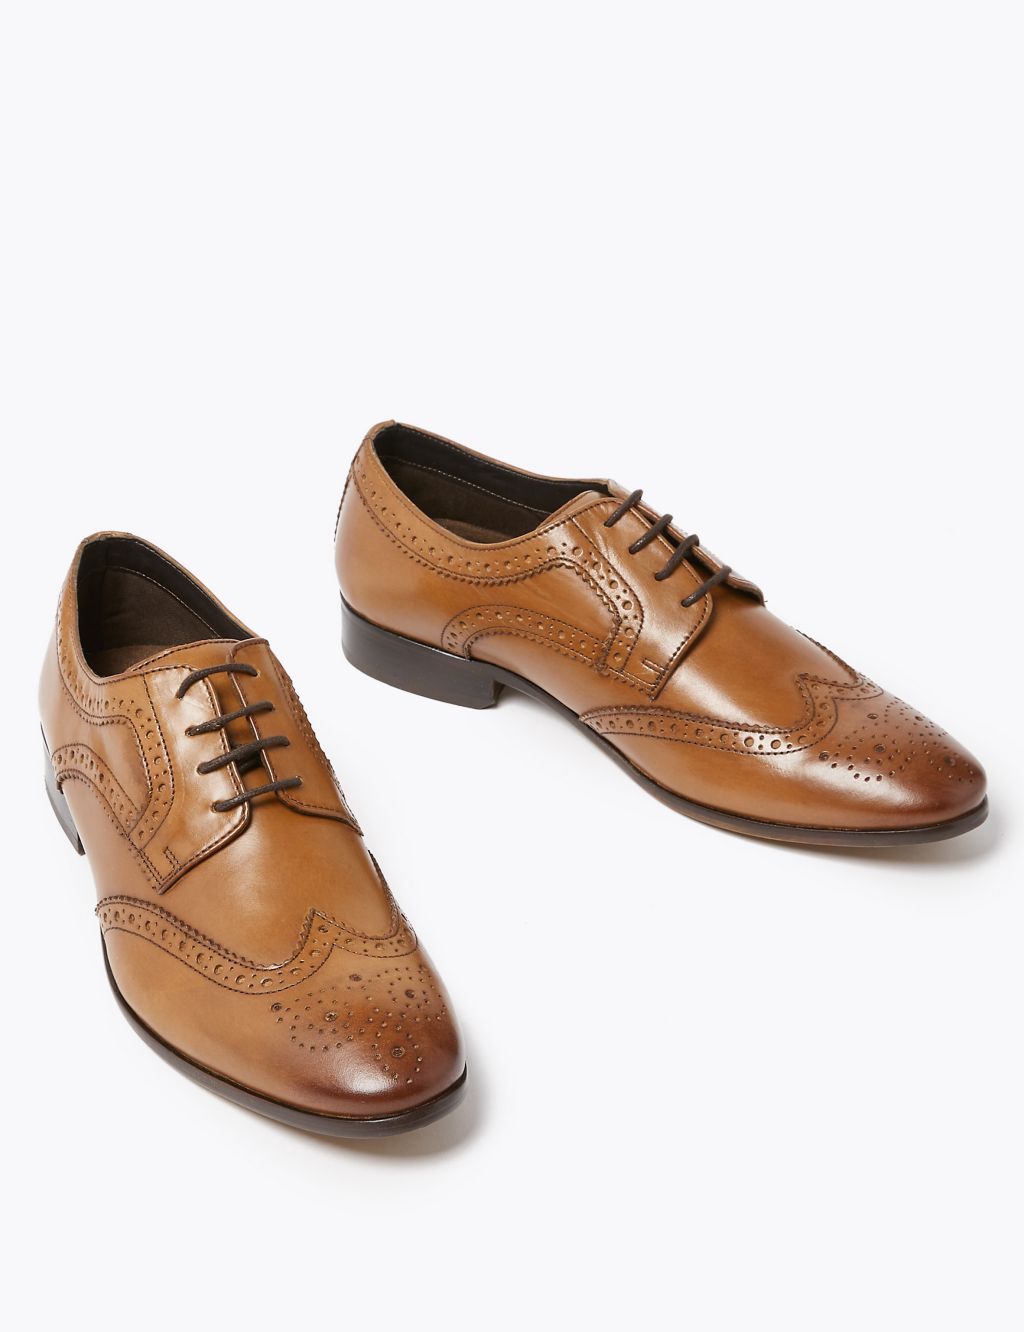 Wide Fit Leather Brogues image 2